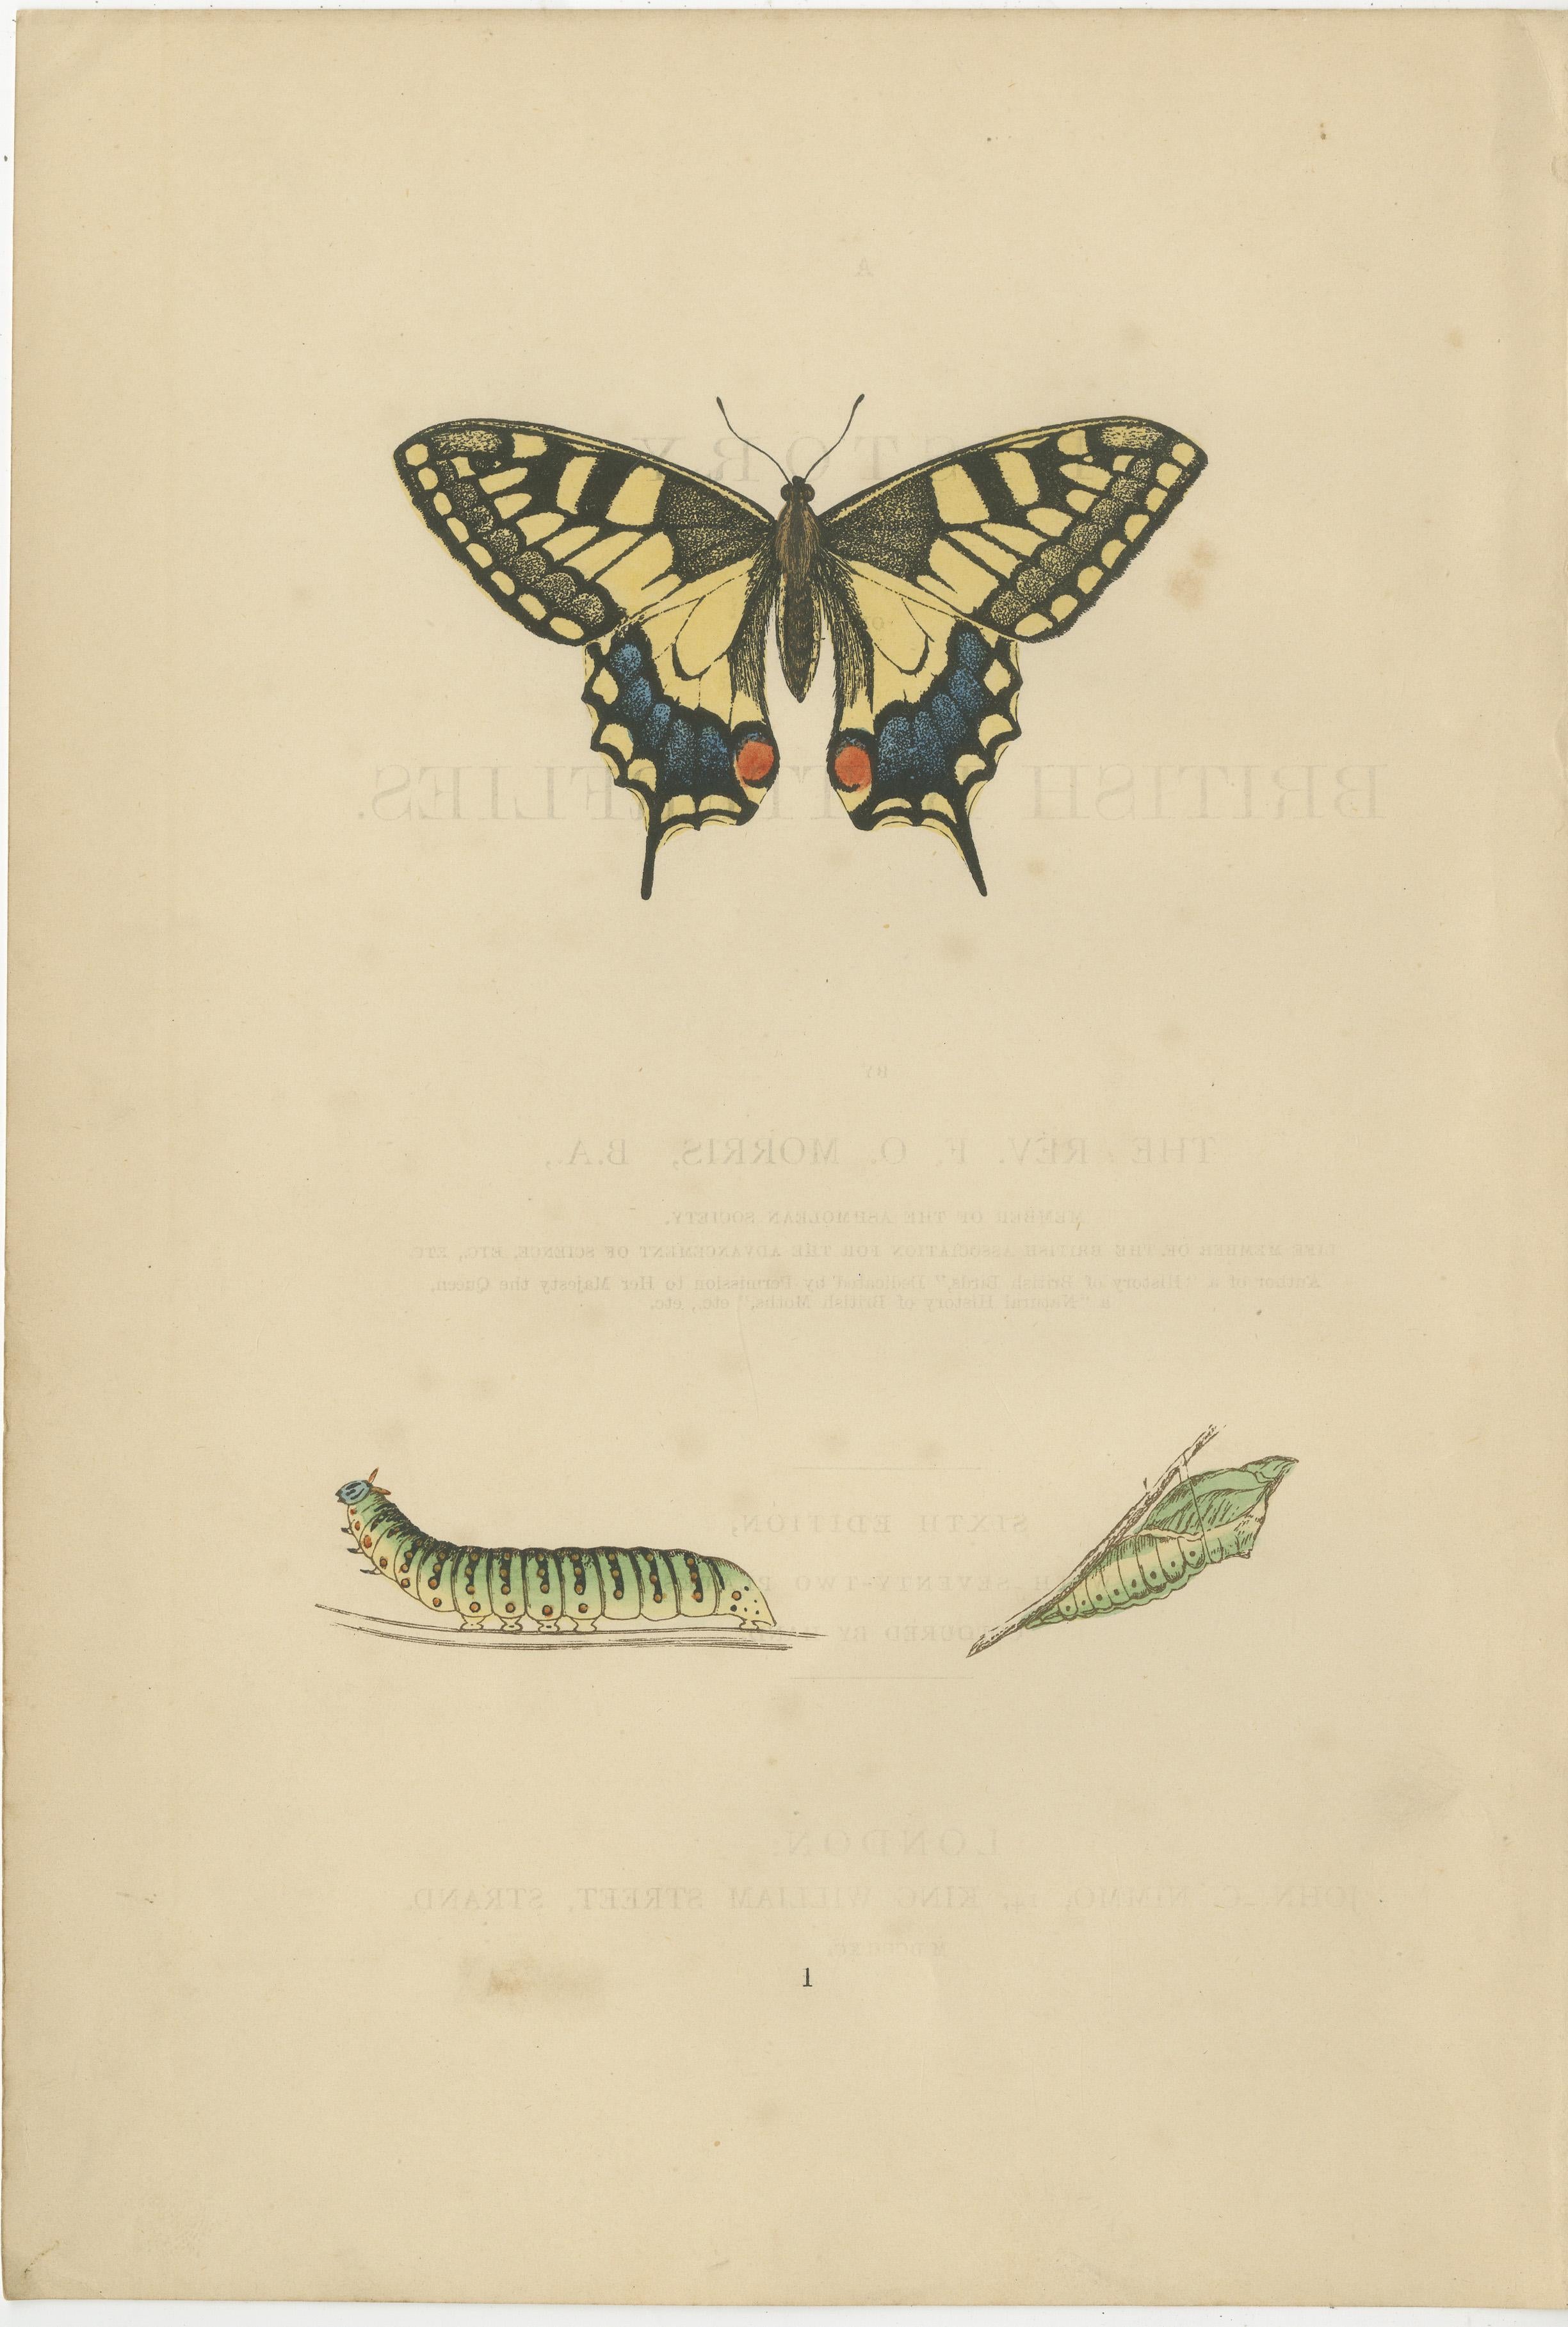 Three original hand-colored plates from the sixth edition of 'A History of British Butterflies' by Morris, which date back to 1890. 

A closer look at each of the species depicted:

1. **The Swallow Tail (Papilio machaon)**: This butterfly is easily